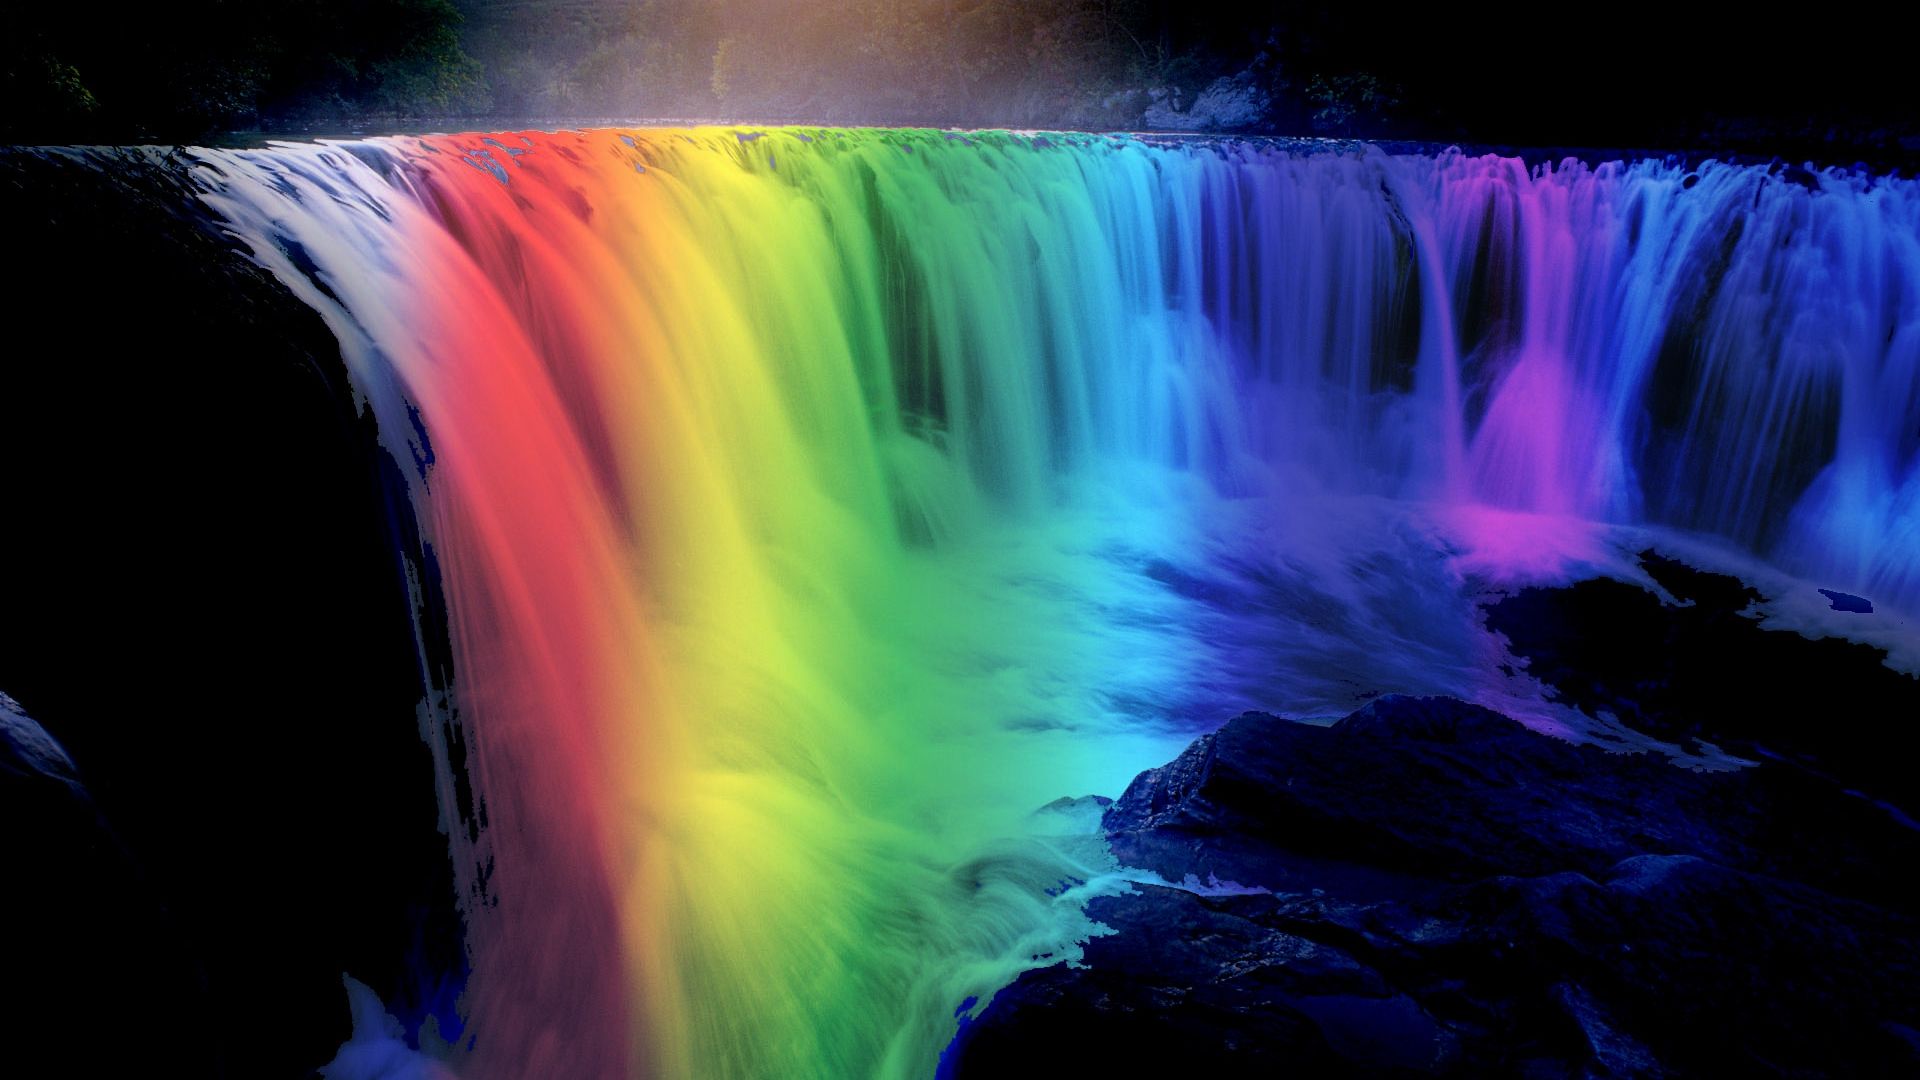 Free download Rainbow Waterfall iphone wallpaper only at Wallpaper